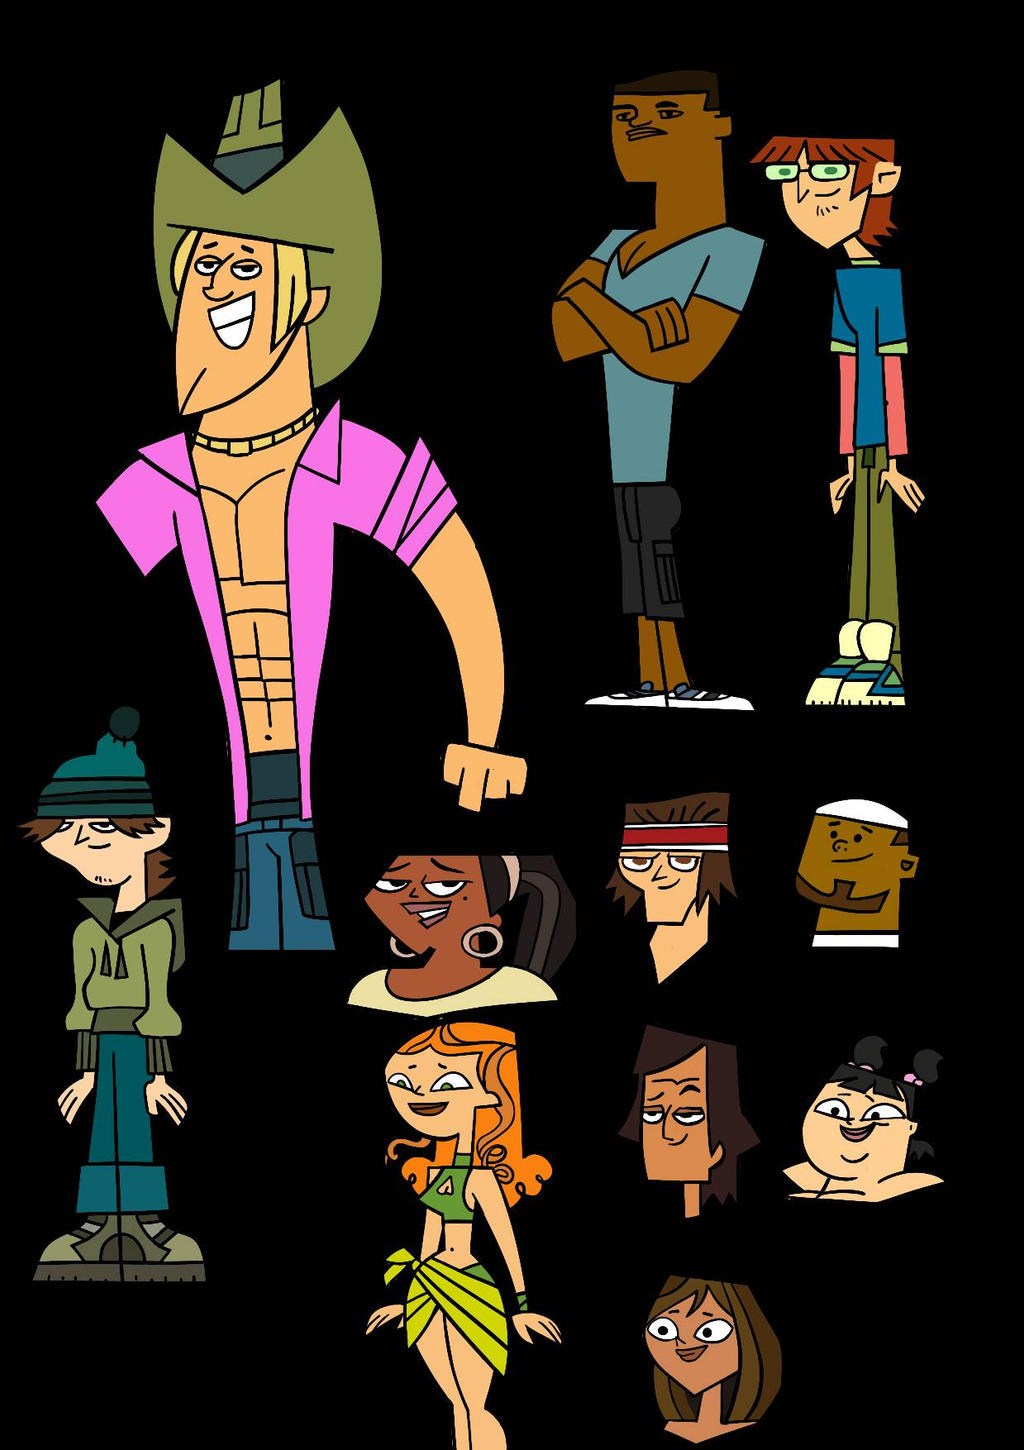 Other total drama character design study by ErikScaglione on DeviantArt